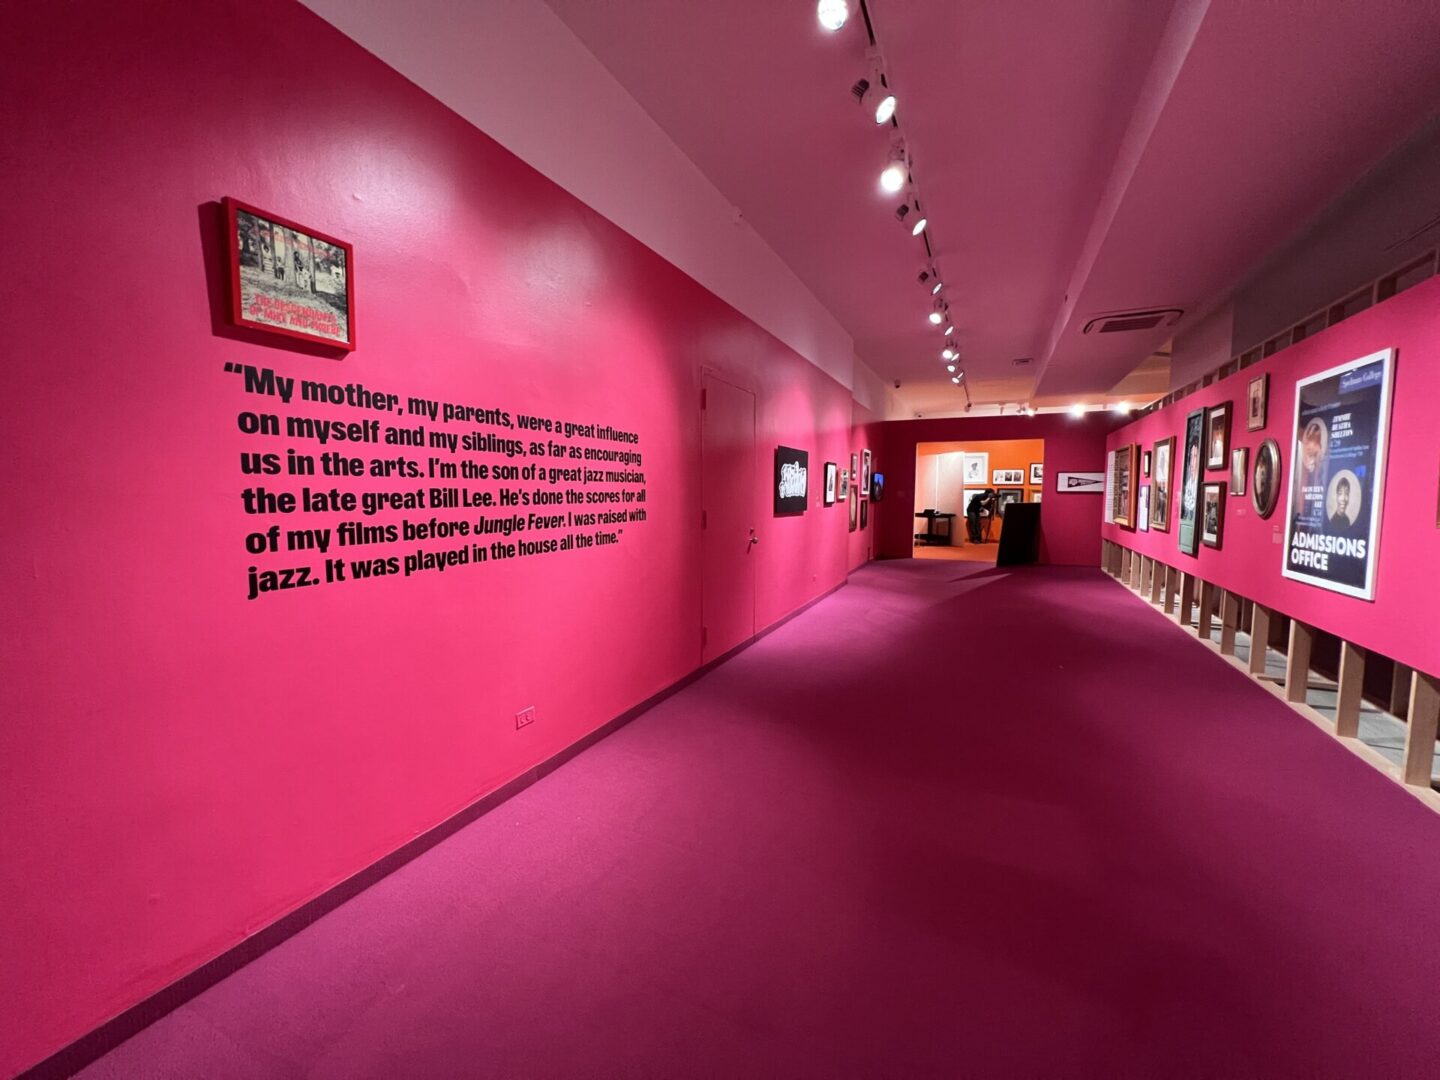 A hallway with pink walls and a wall quote.